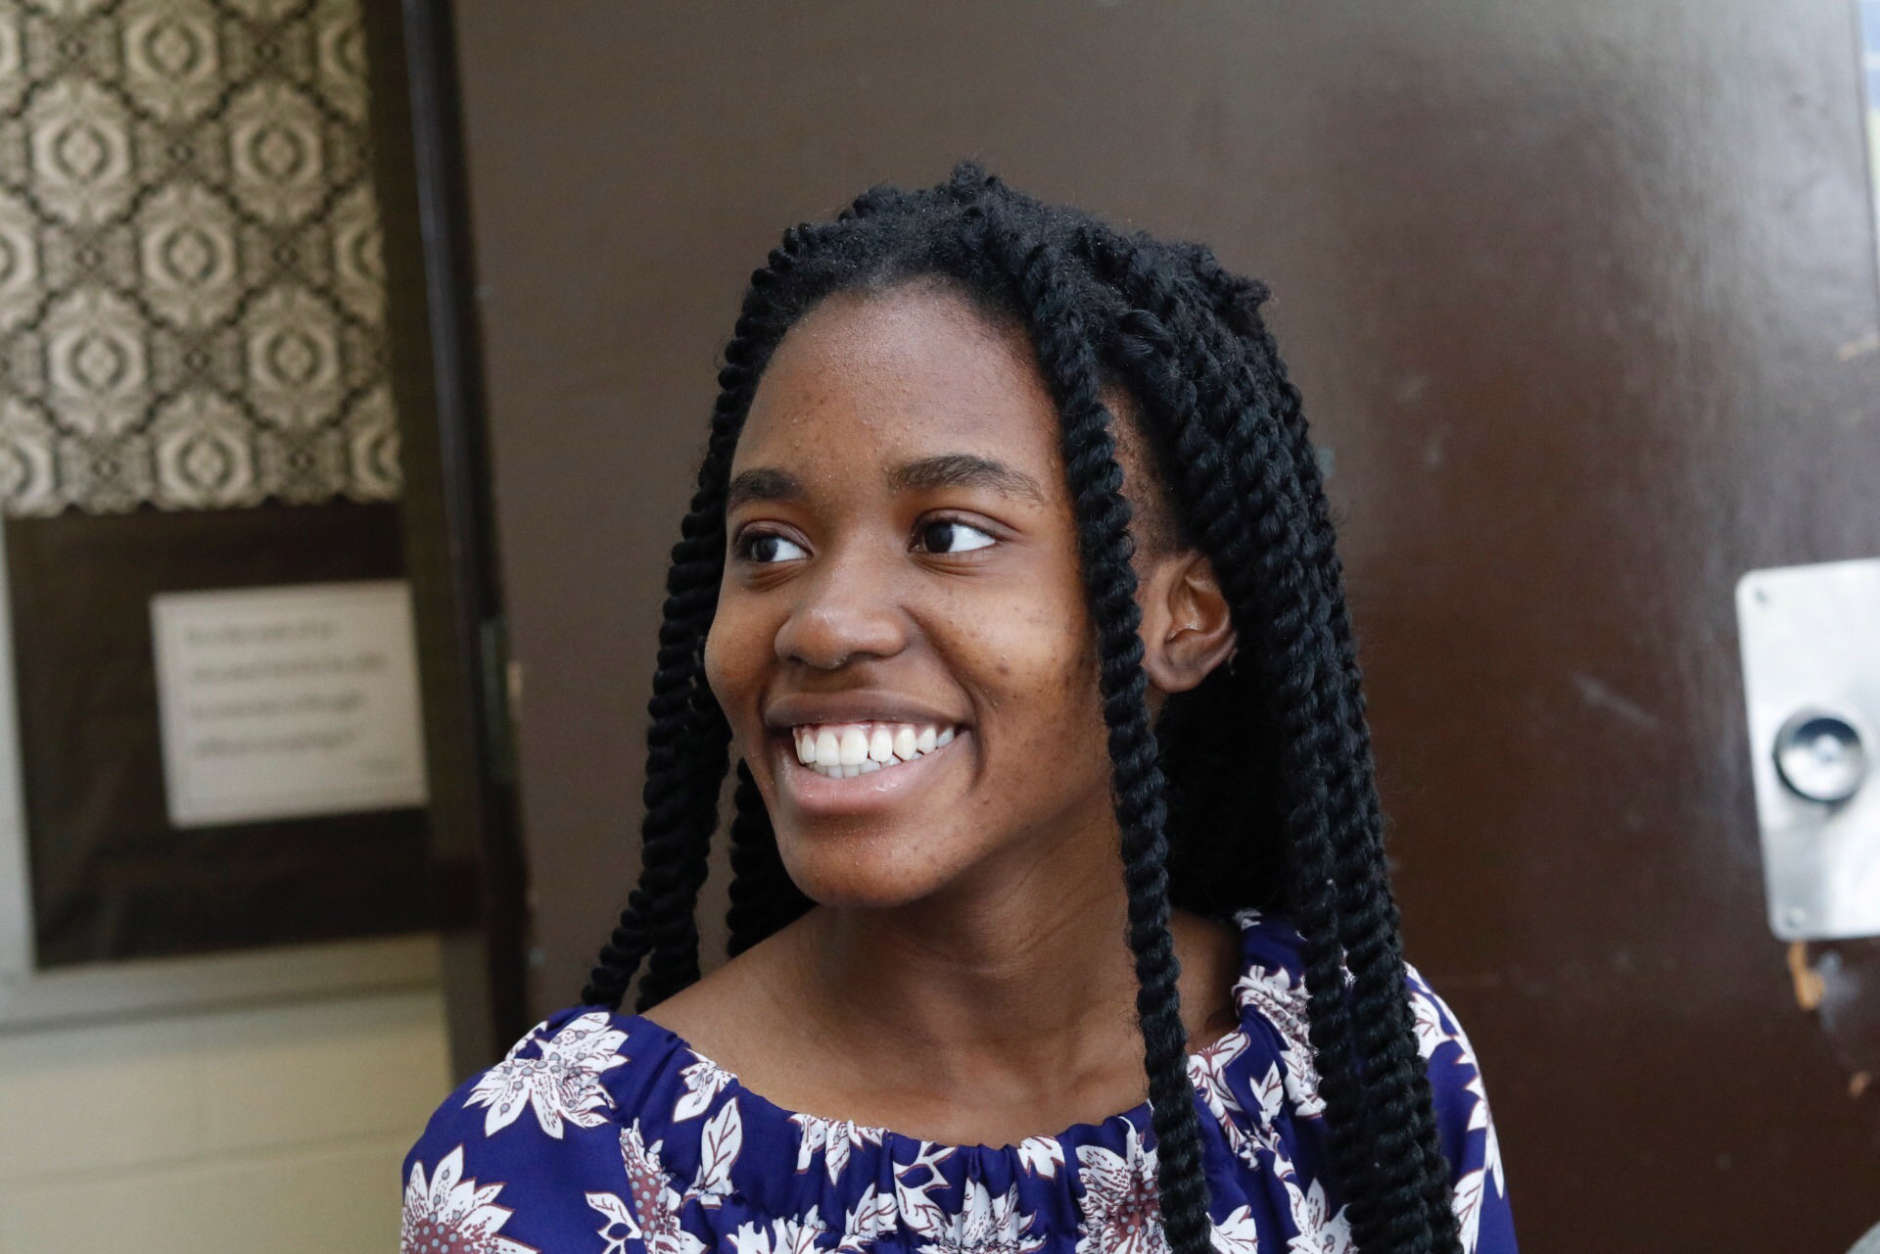 DuVal student Olawunmi Akinlemibola has been accepted by more than 14 schools, including Harvard, Princeton, Stanford, Duke and the University of Pennsylvania. (WTOP/Kate Ryan)